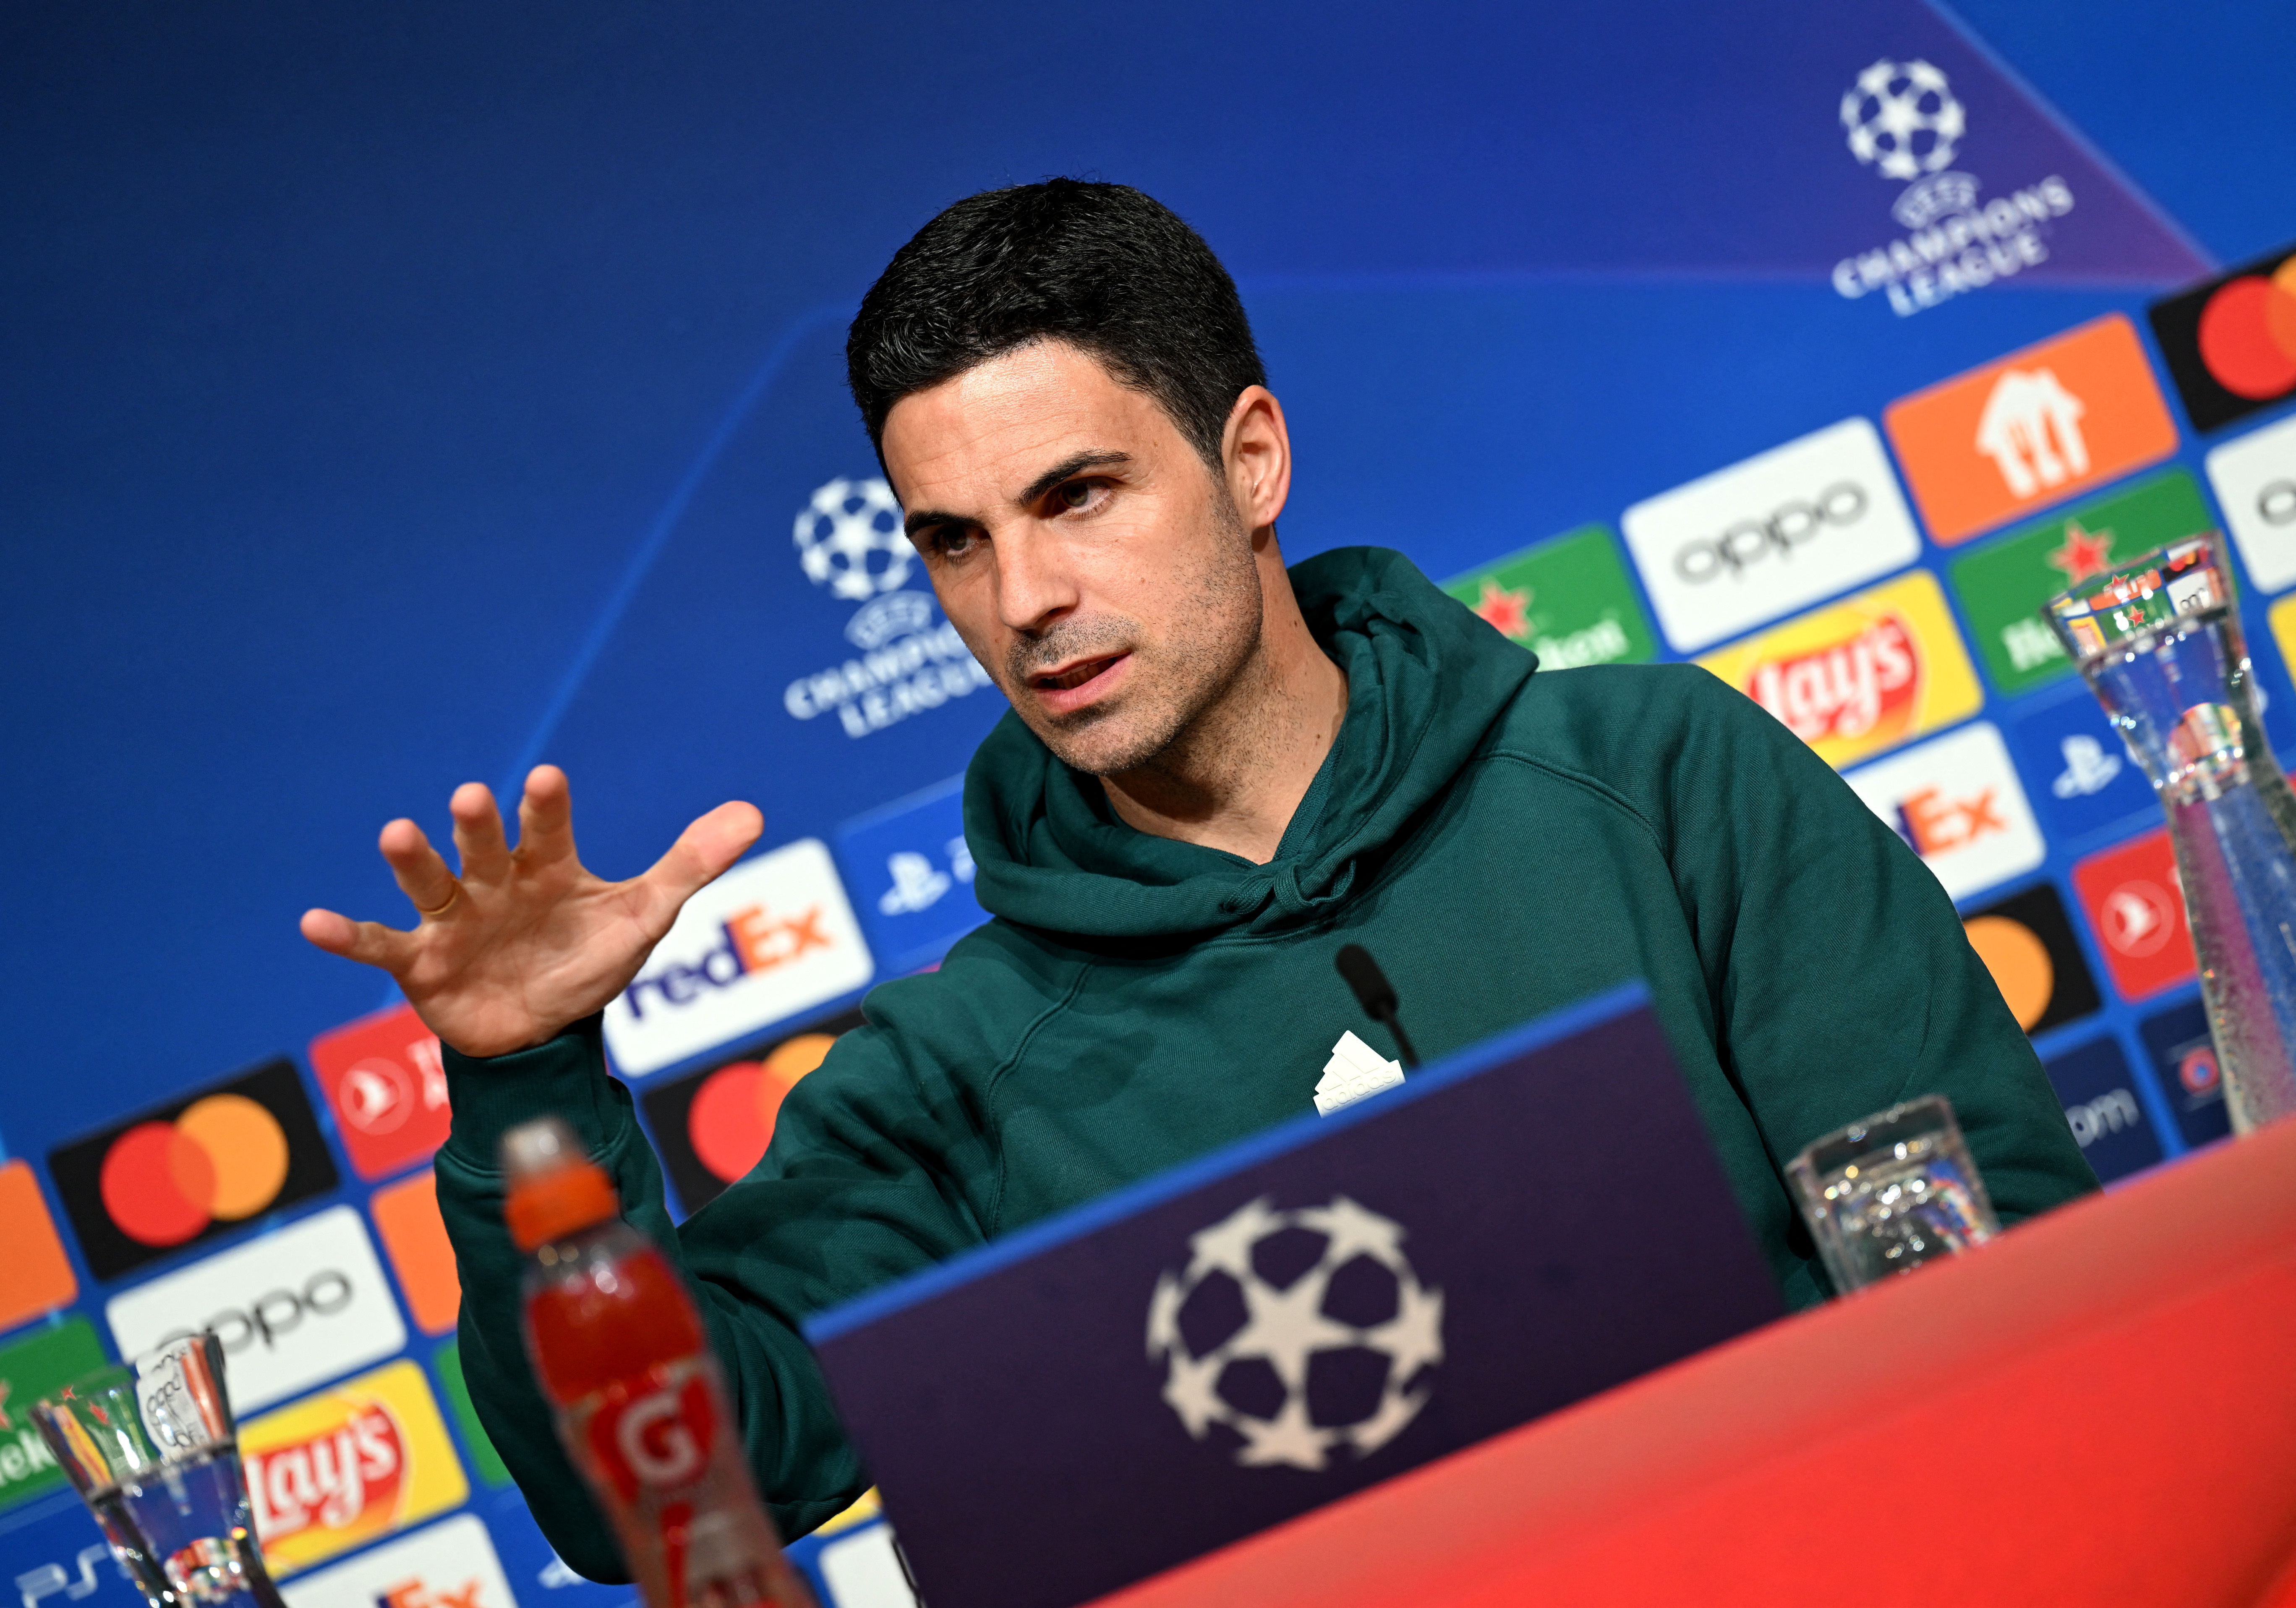 Champions League - Arsenal Press Conference